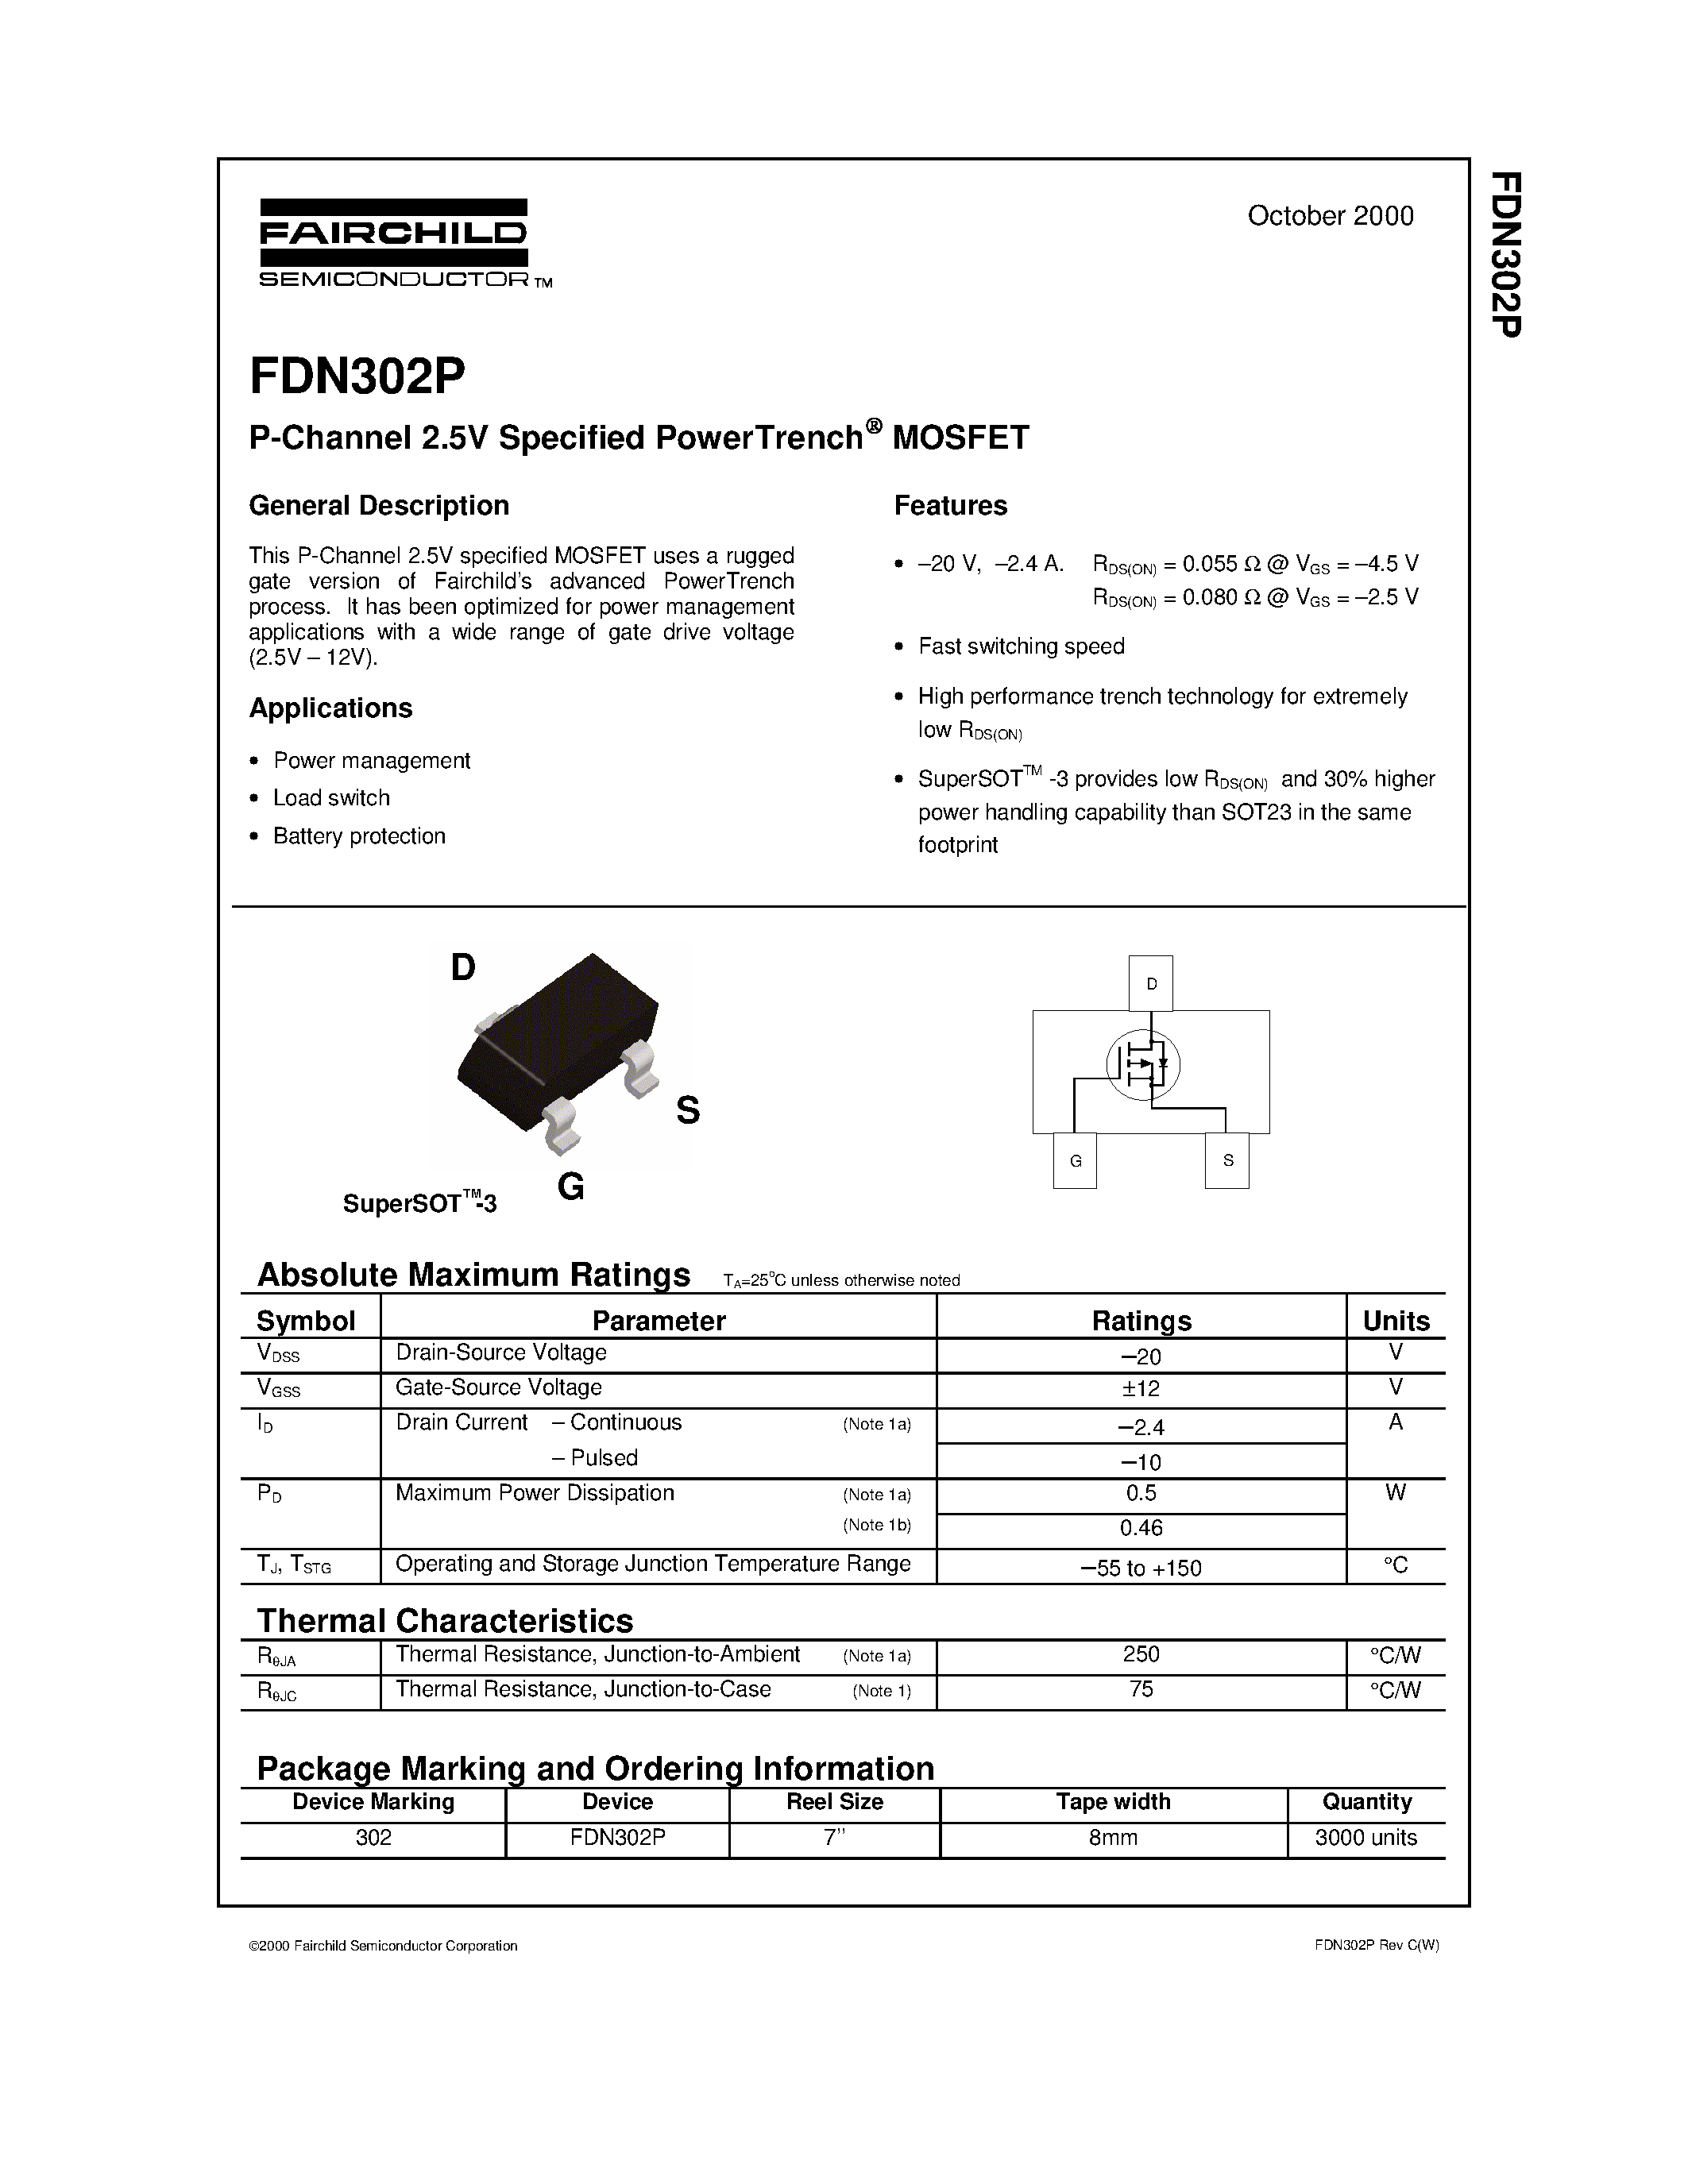 Datasheet FDN302P - P-Channel 2.5V Specified PowerTrench MOSFET page 1